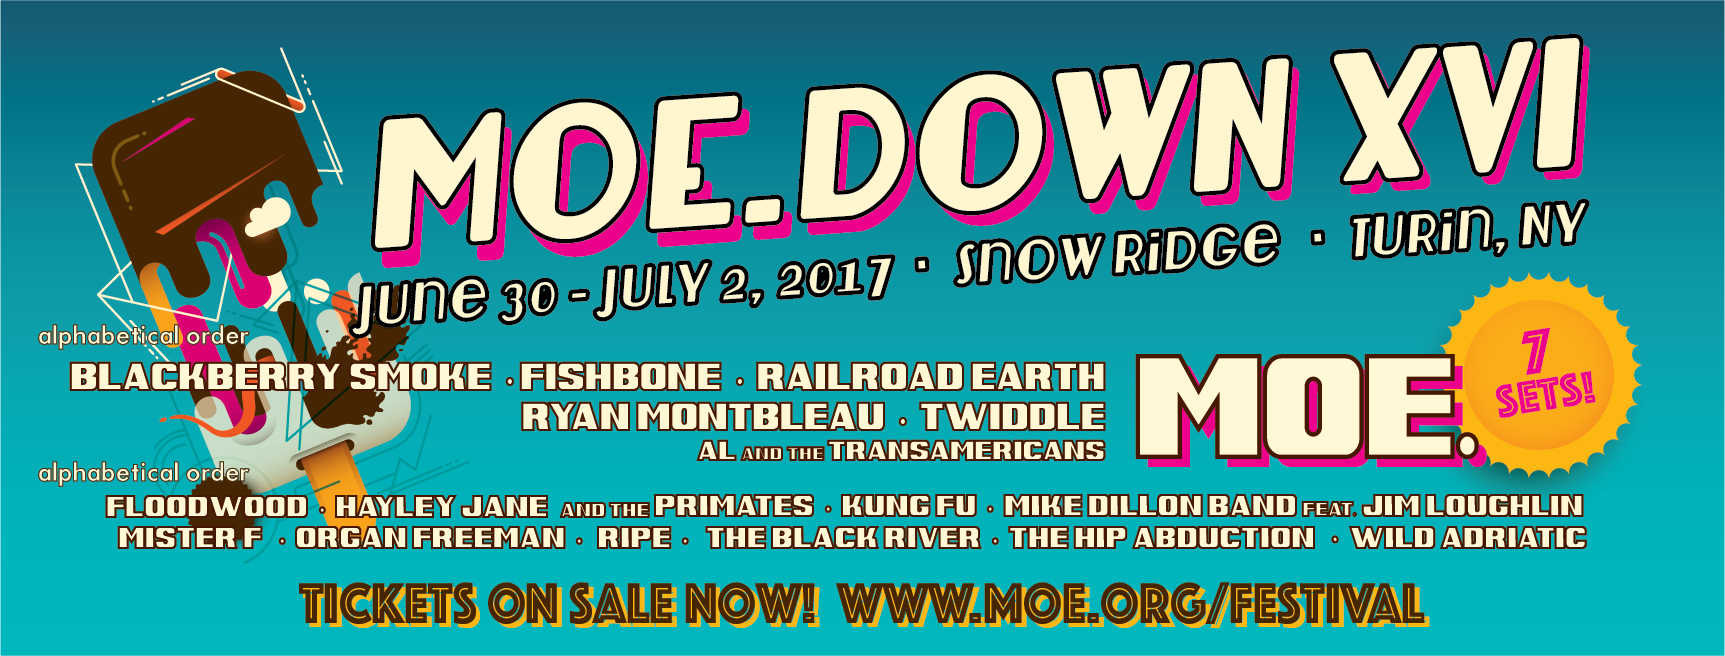 moe.down 2017 lineup featuring Blackberry Smoke, Fishbone, Twiddle and more in Turin, New York. Photo by: moe. / Twitter